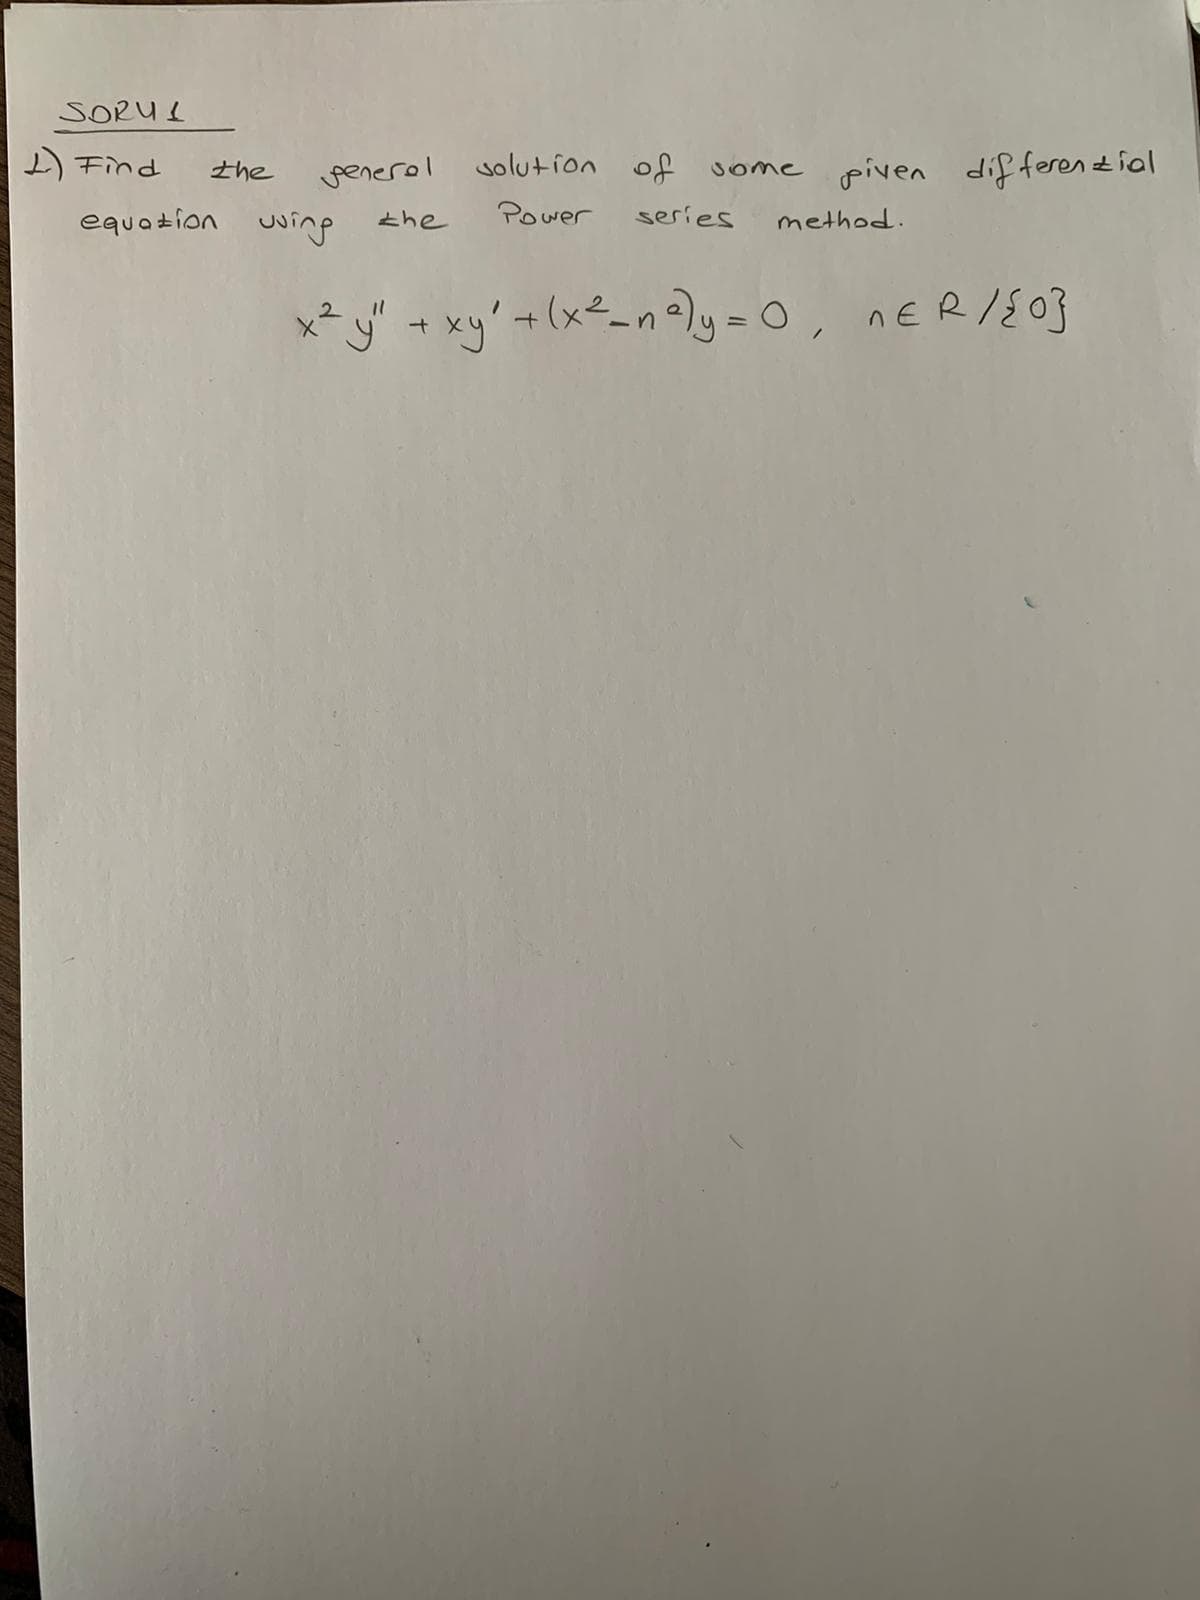 SORUL
王nd
penerol
solution of
Jome piven differential
the
equation
uving
the
Power
series
method.
x² y" + xy'+(x²_n°y = 0,
nER/E0}
